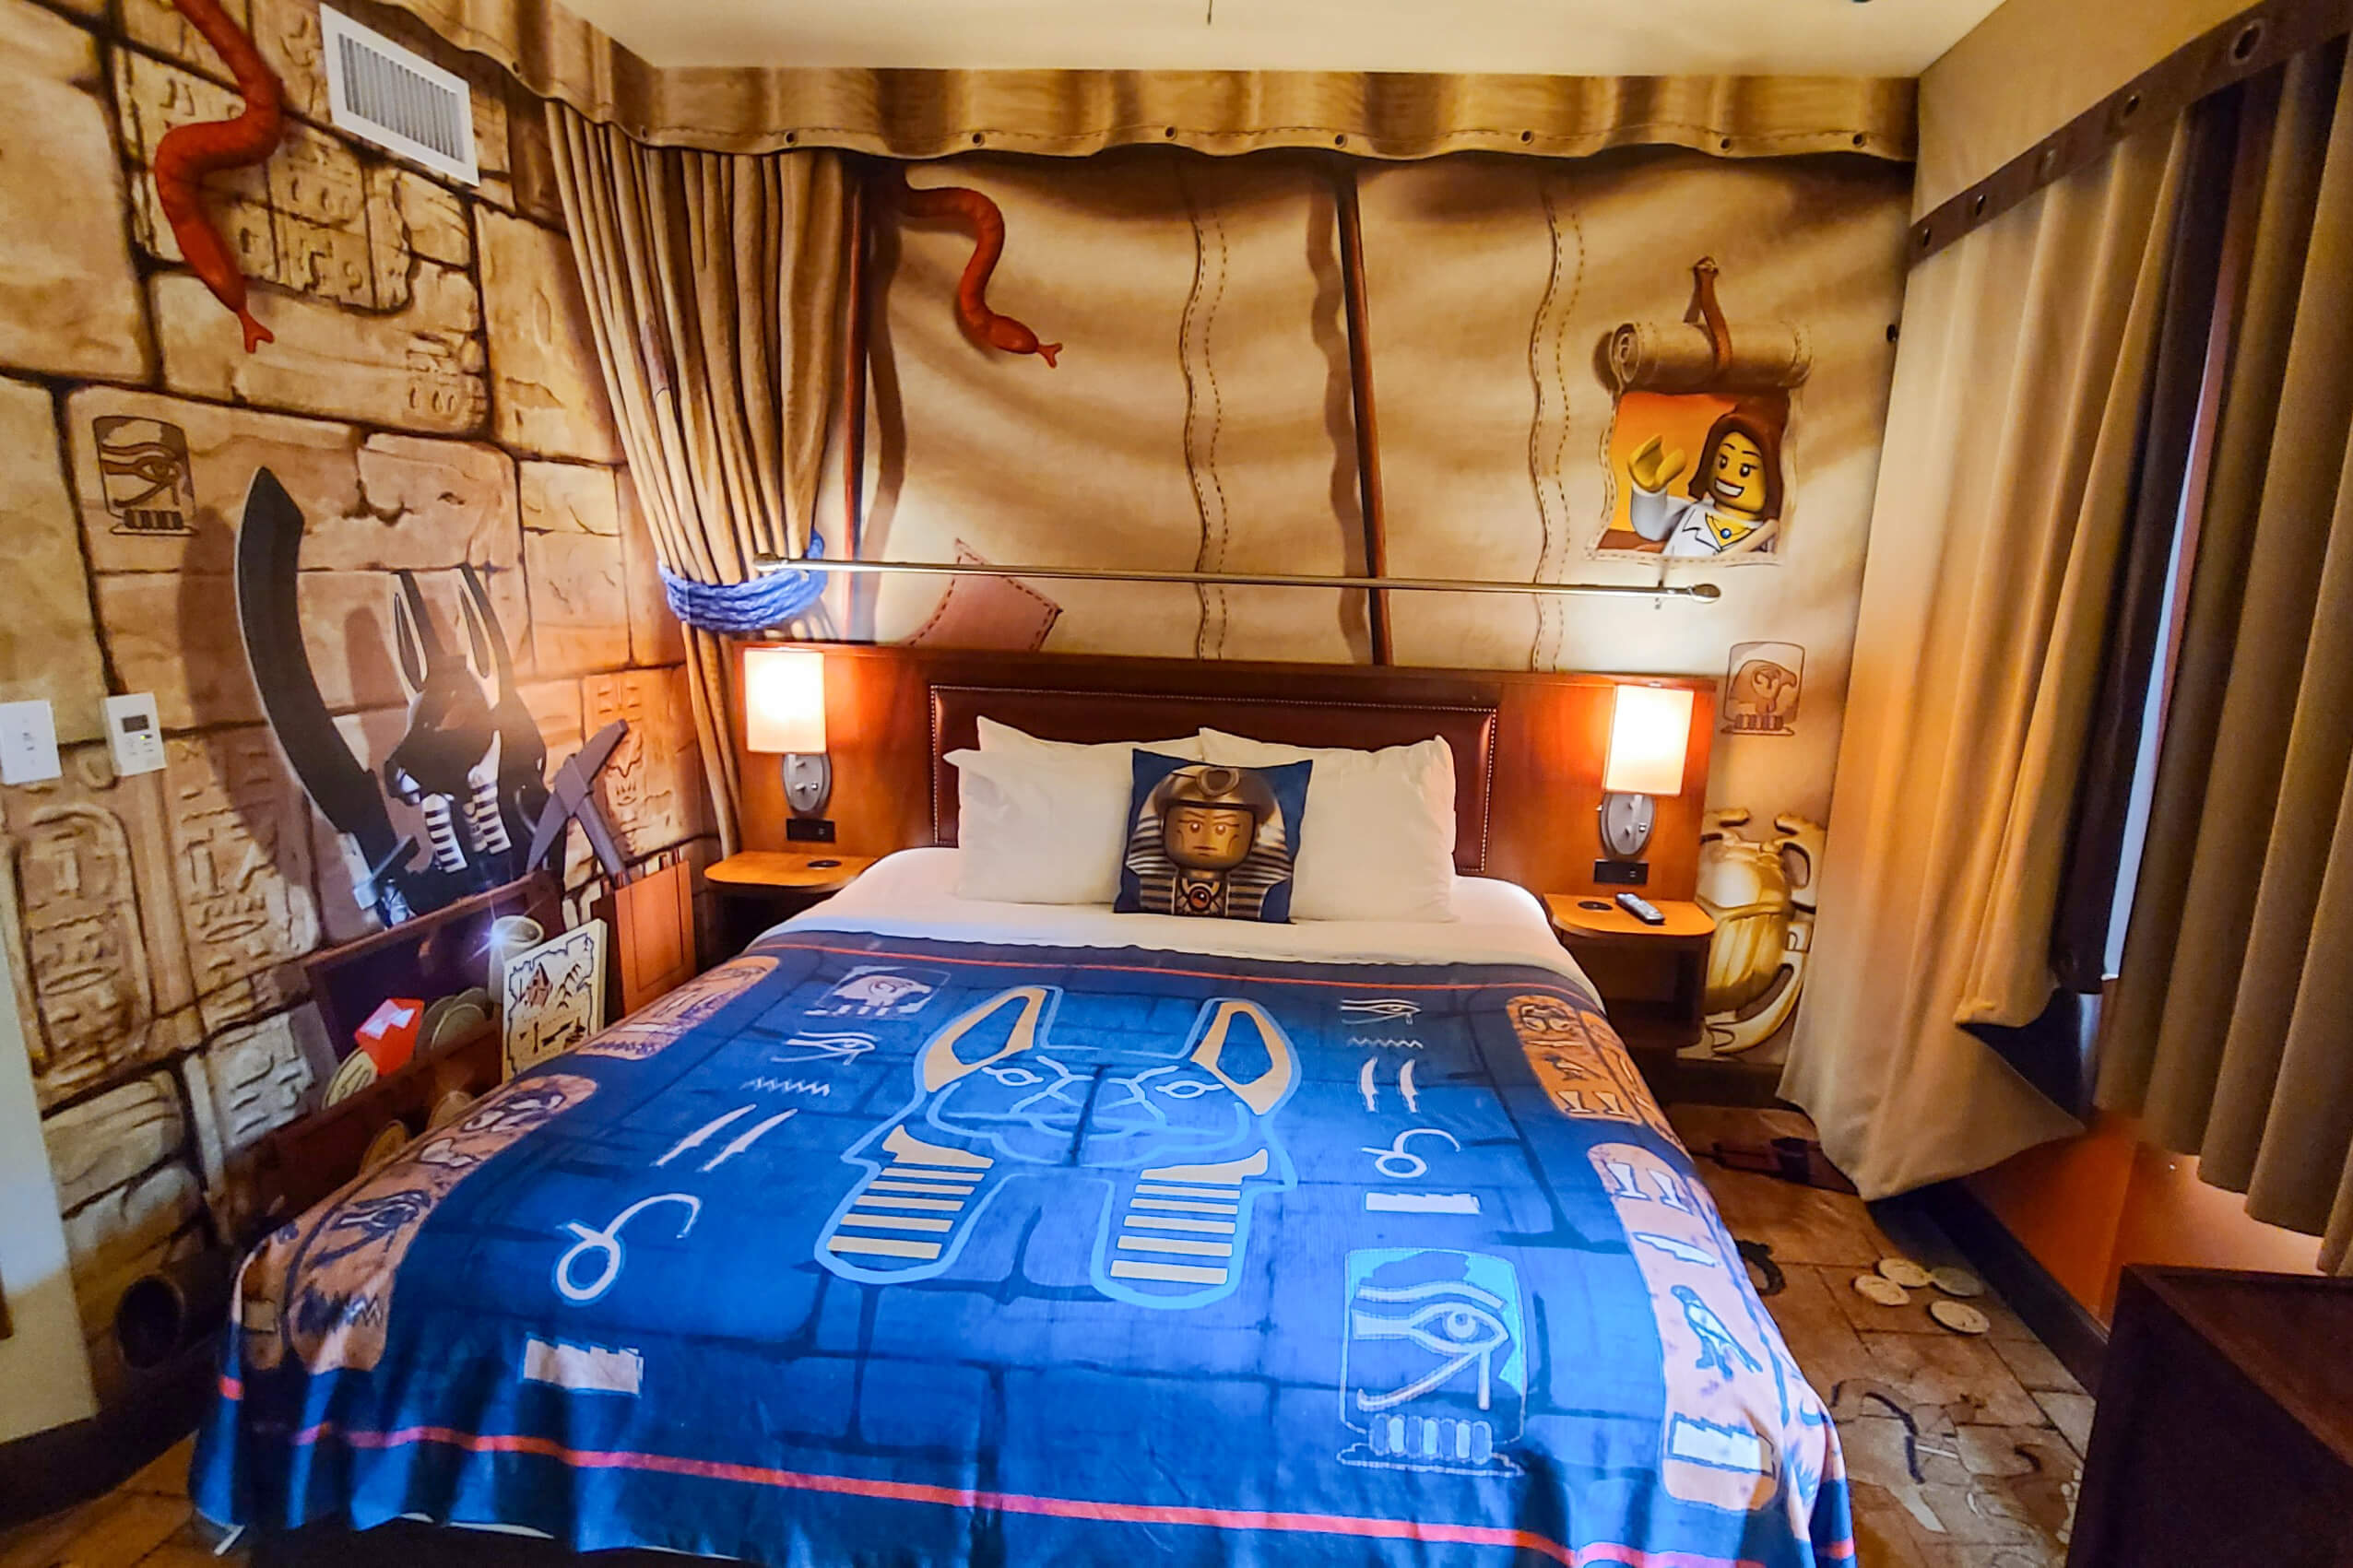 Adventure Fully Themed Room at the LEGOLAND Hotel